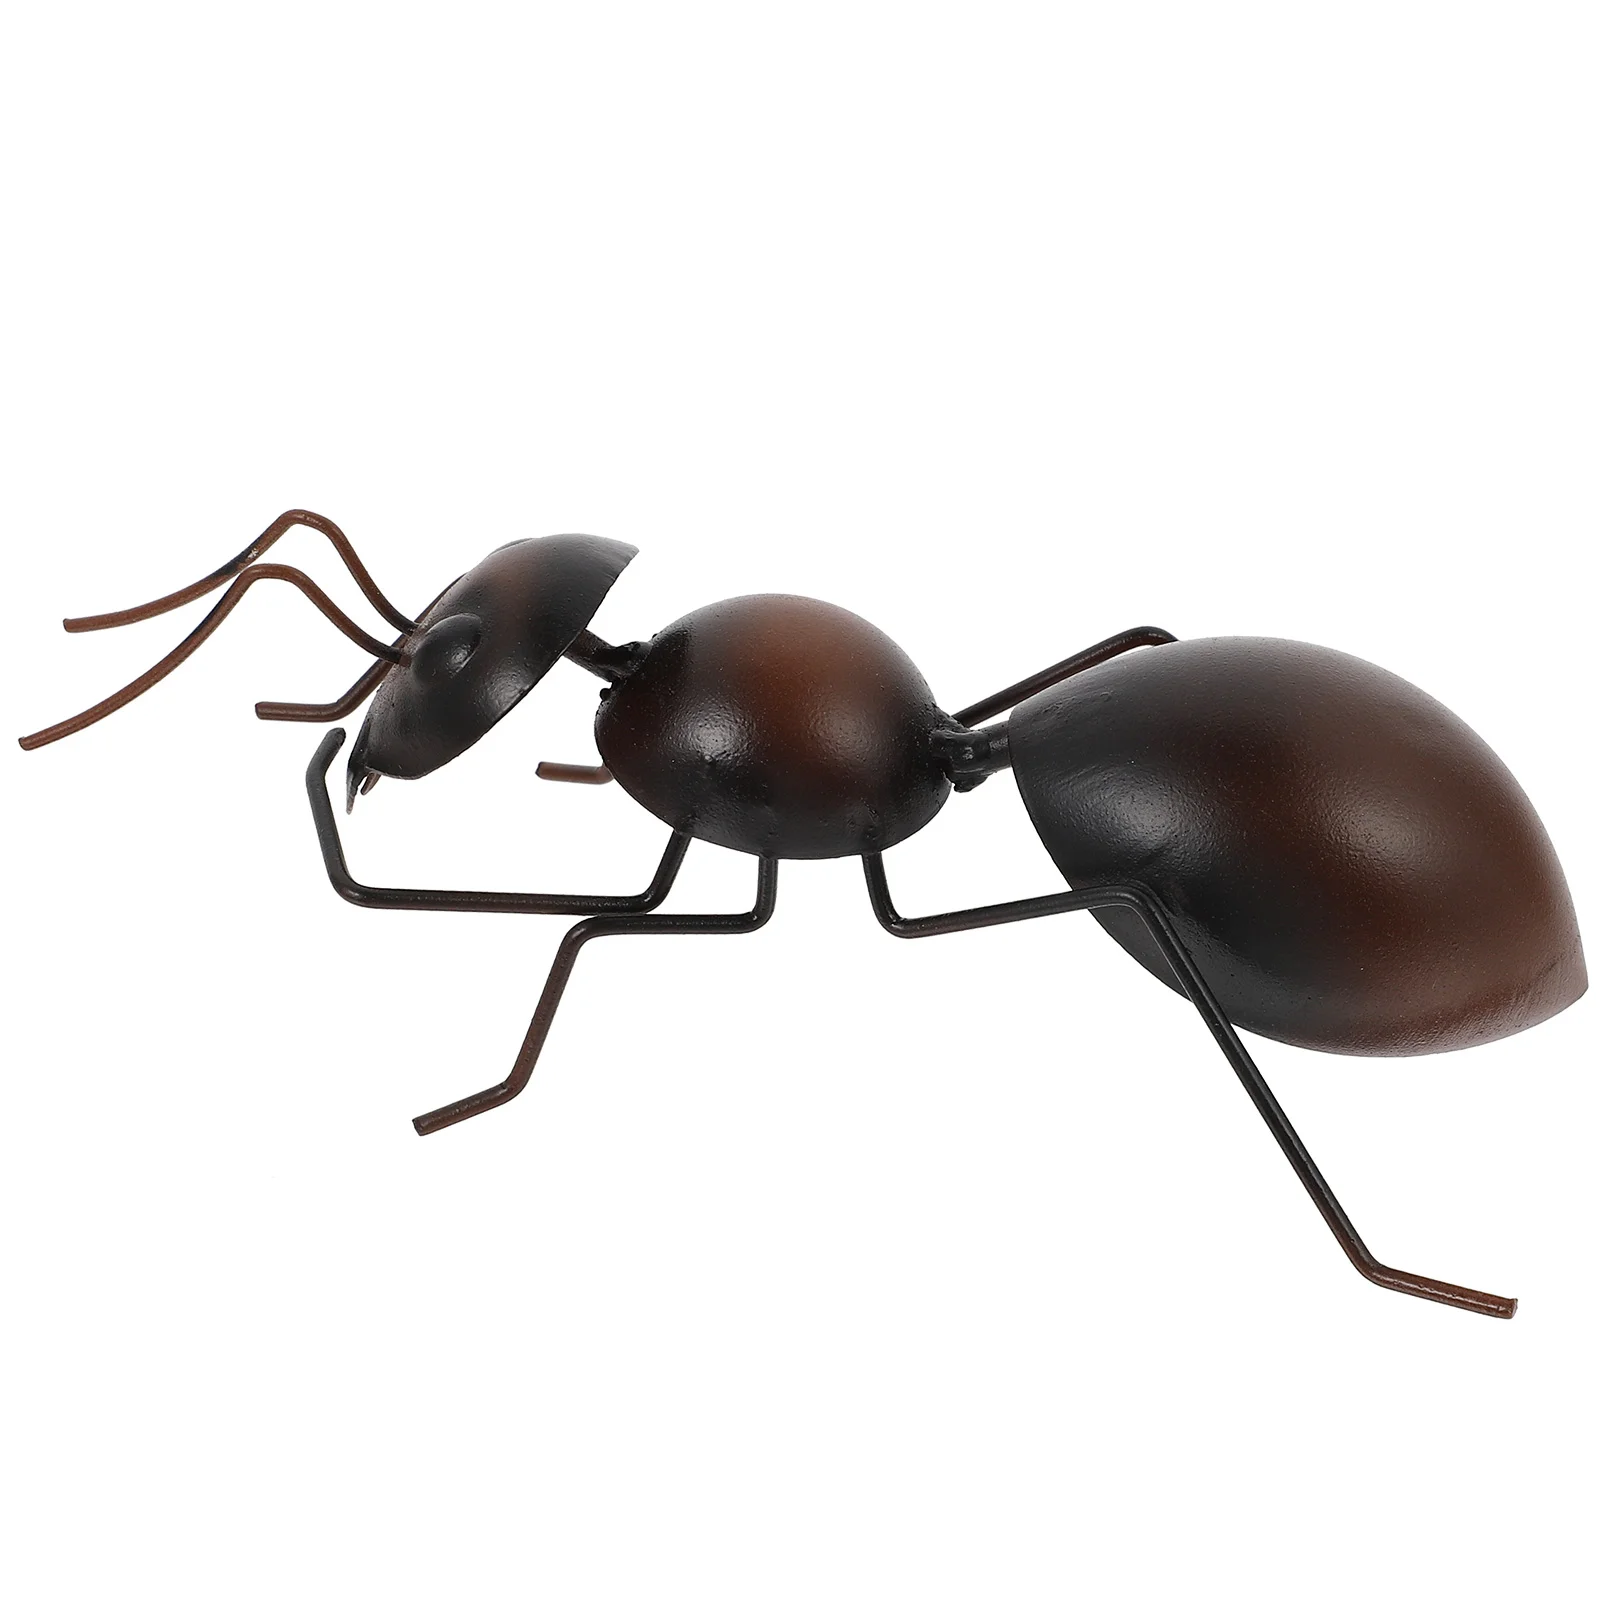 

Ant Metal Decor Wall Sculpture Yard Garden Insect Ants Outdoor Figurine Fence 3D Decorations Statue Animal Decoration Accents